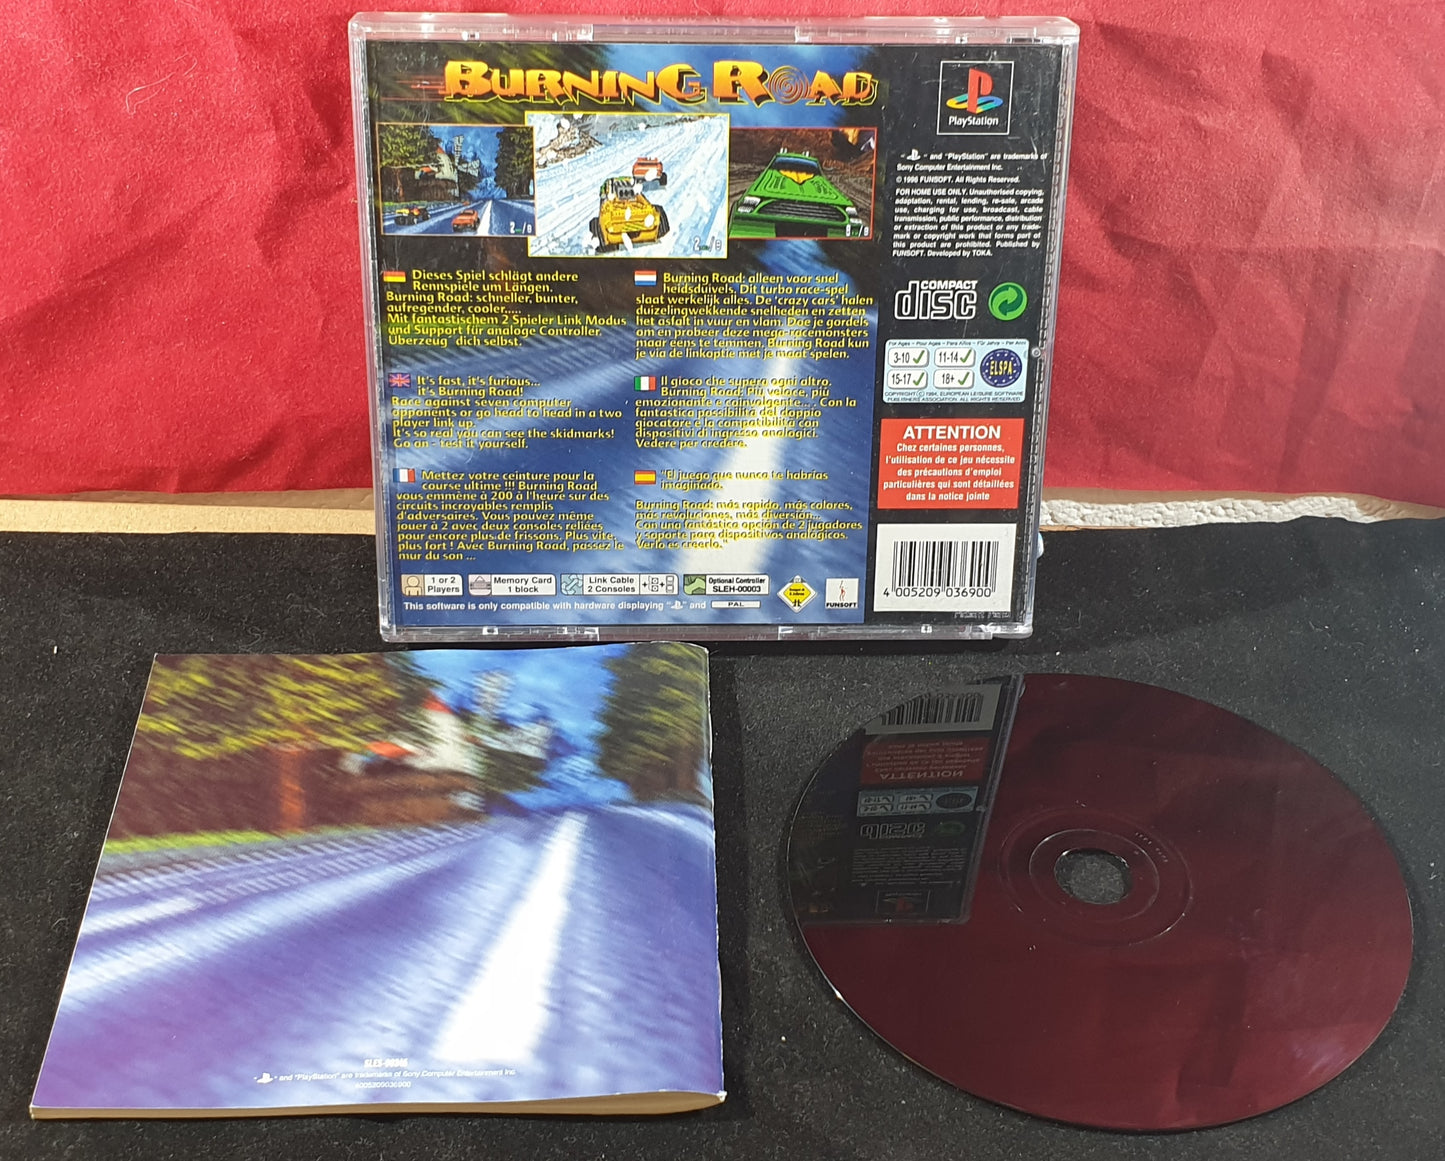 Burning Road Sony Playstation 1 (PS1) Game